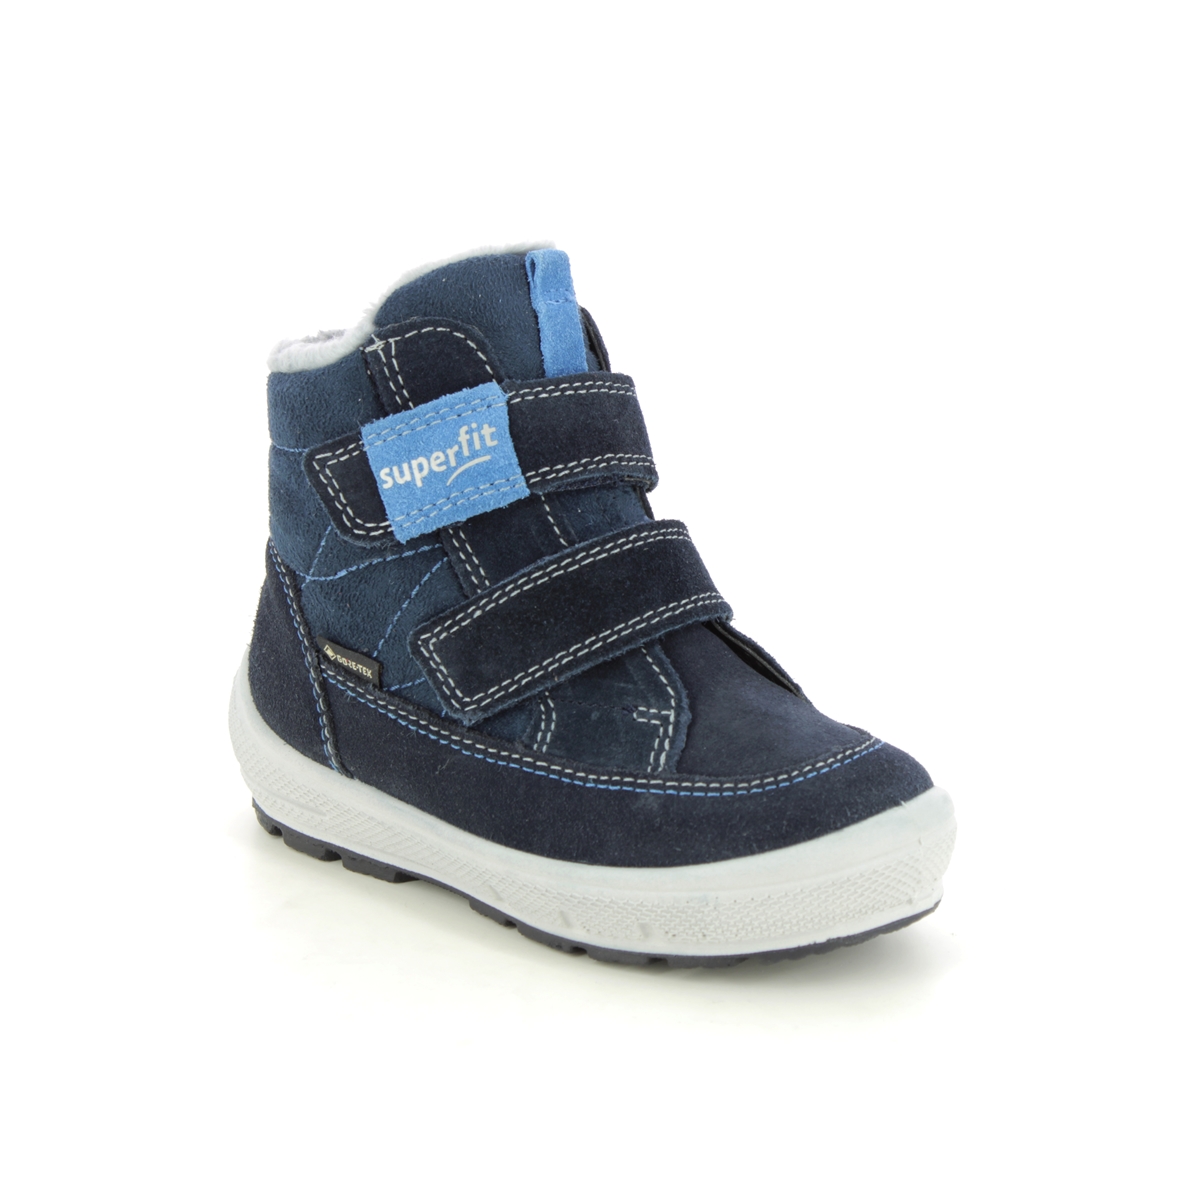 Superfit Groovy Gtx Navy Kids Toddler Boys Boots 1009314-8000 In Size 26 In Plain Navy